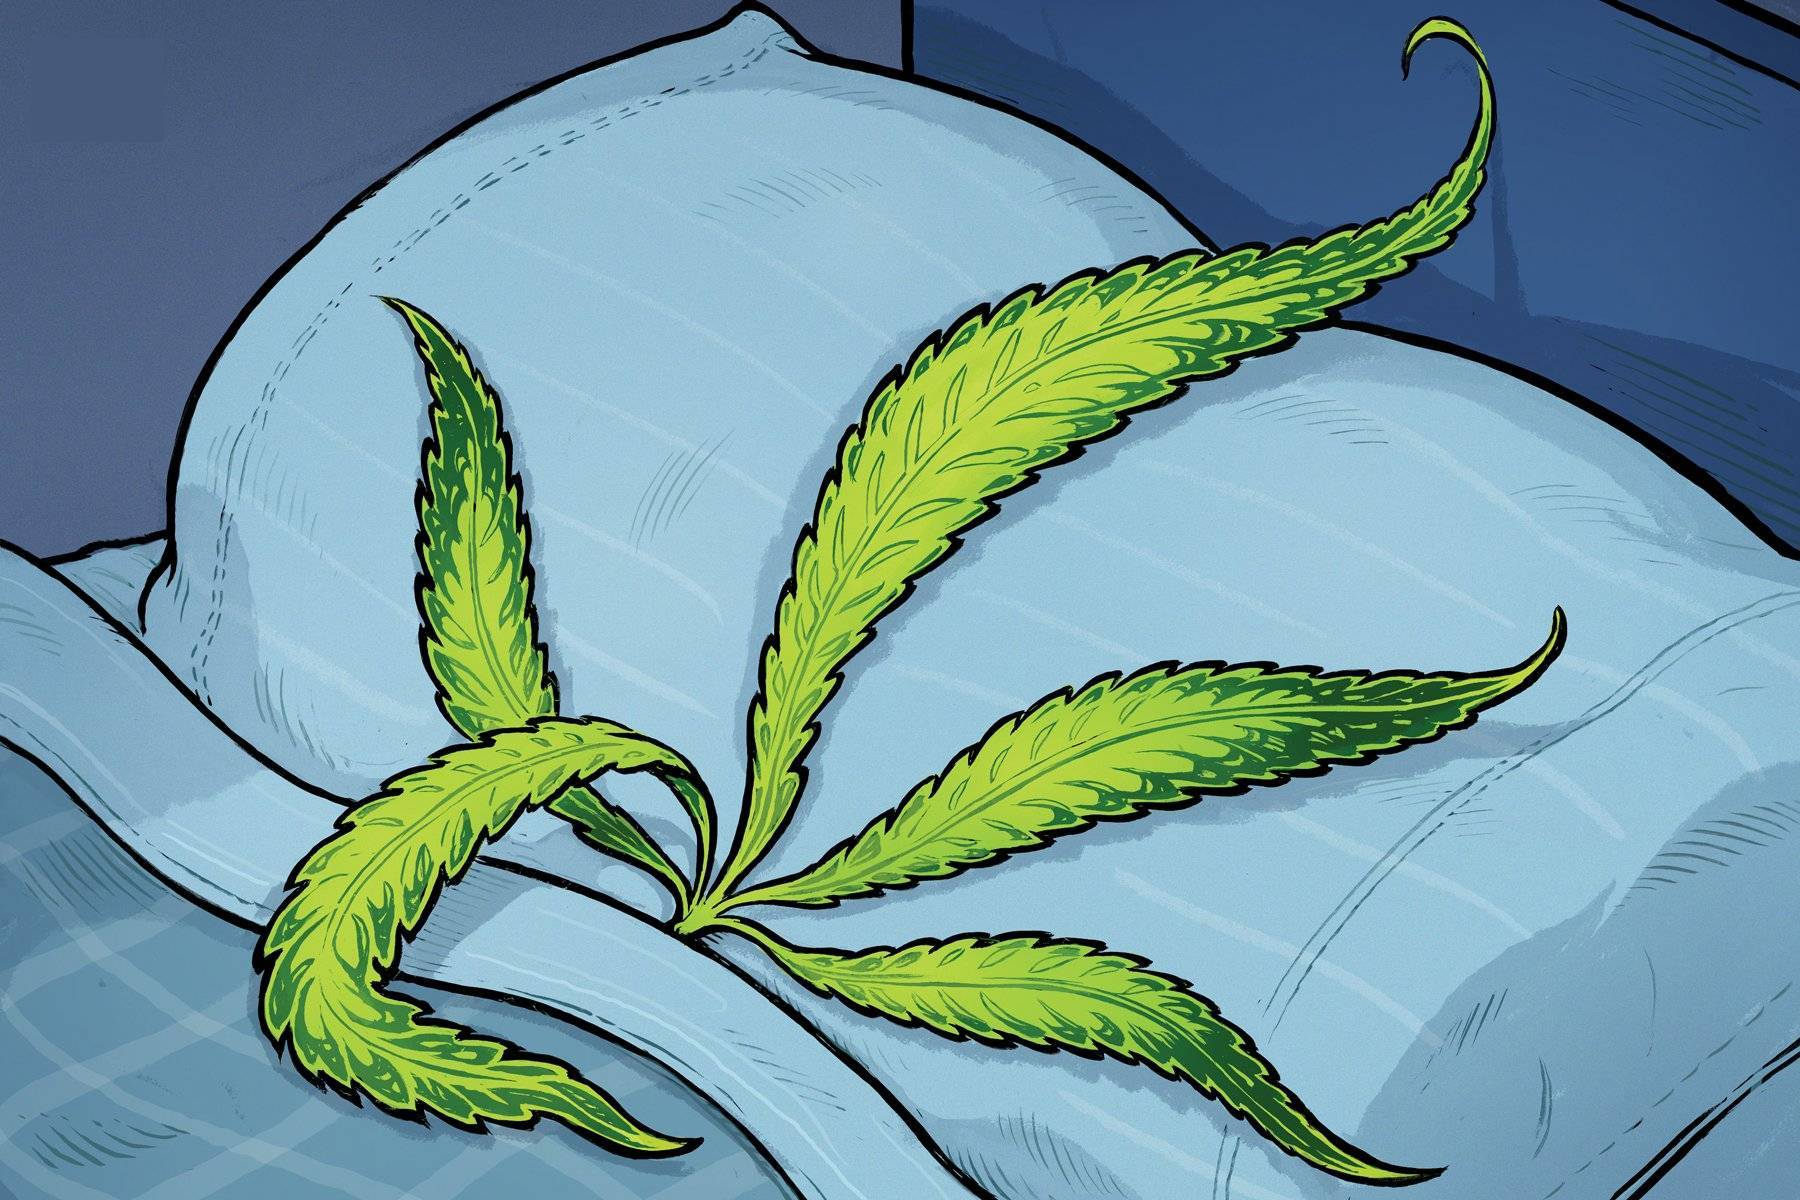 The Pros Cons of Using Cannabis for Sleep